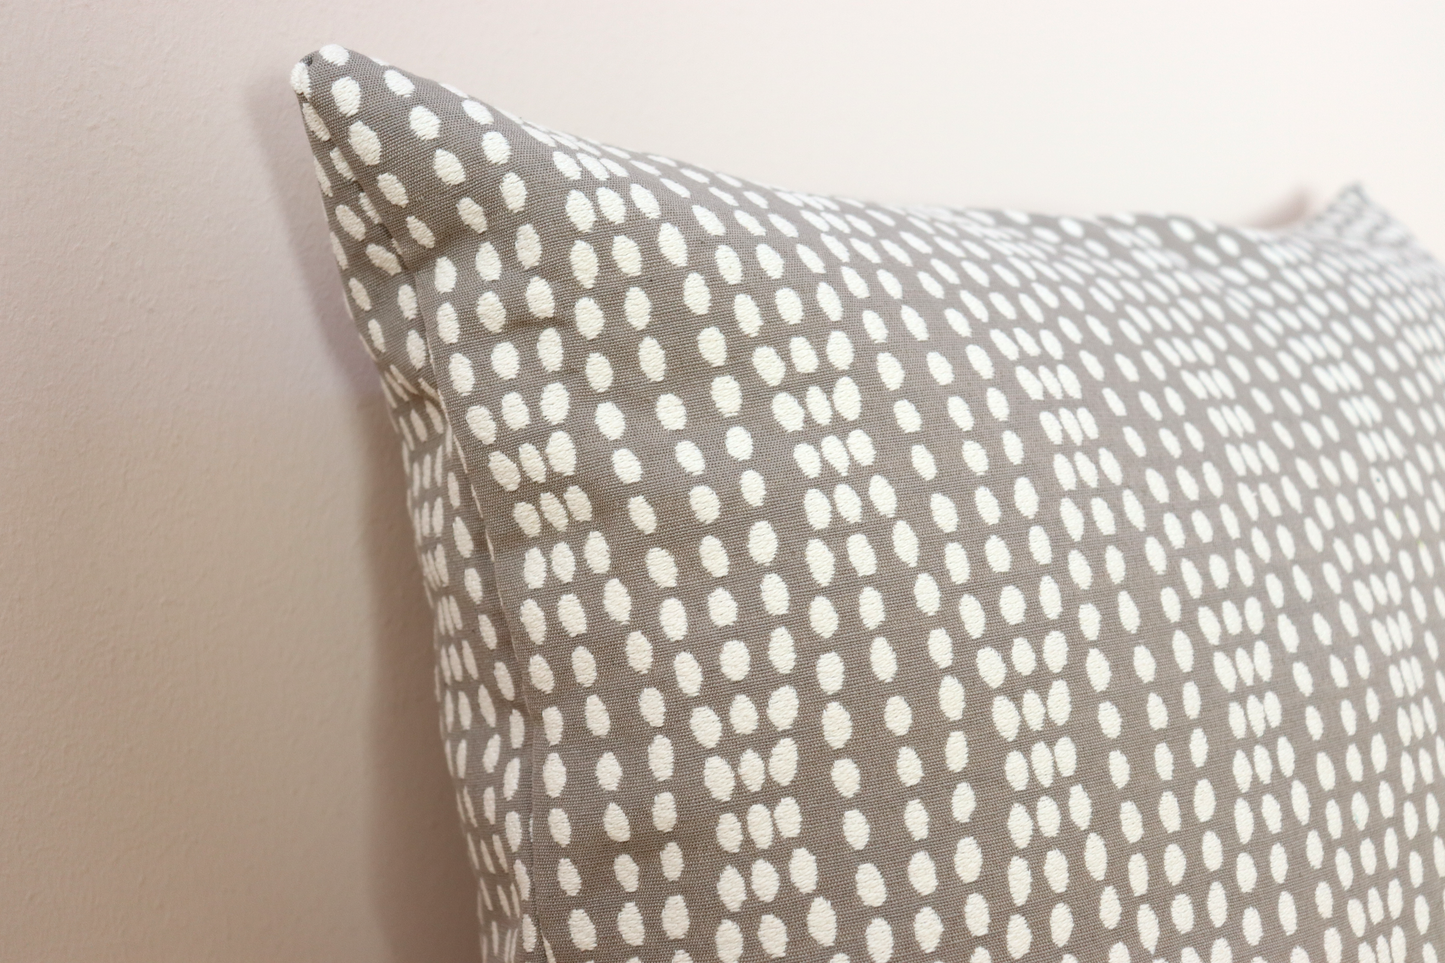 Throw Pillow Cover - Gray and Ivory Dots